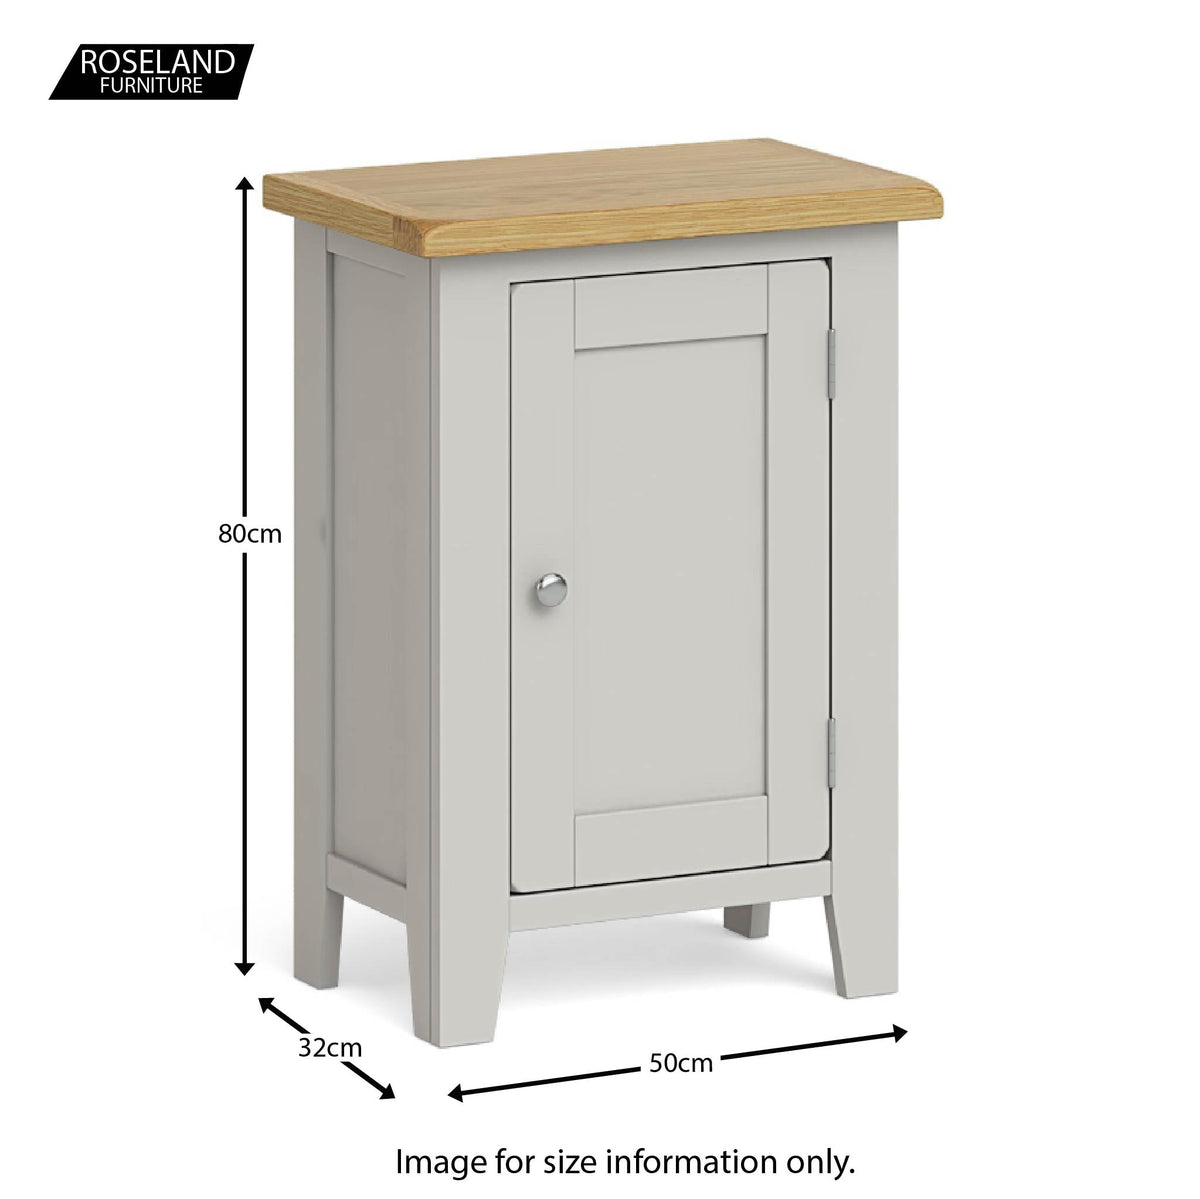 Lundy Grey Single Cabinet - Size guide